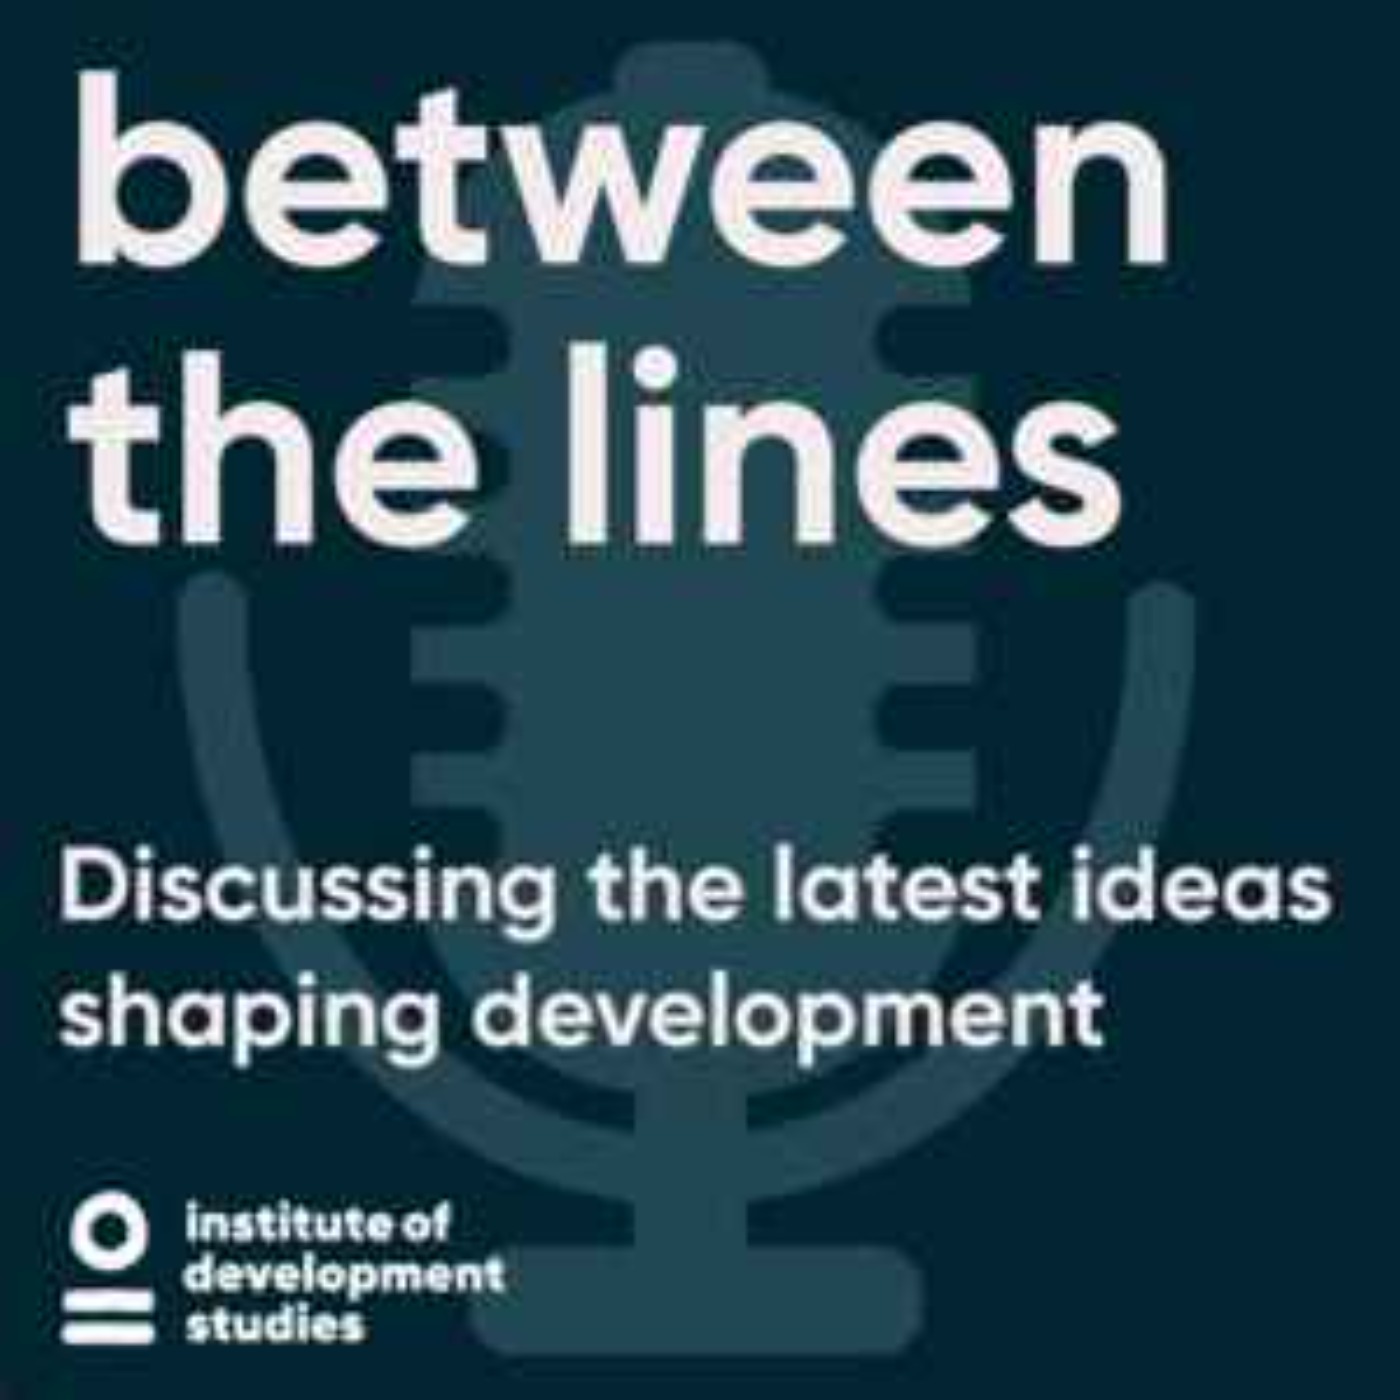 Looking Back to Move Development Forward – with Robert Chambers